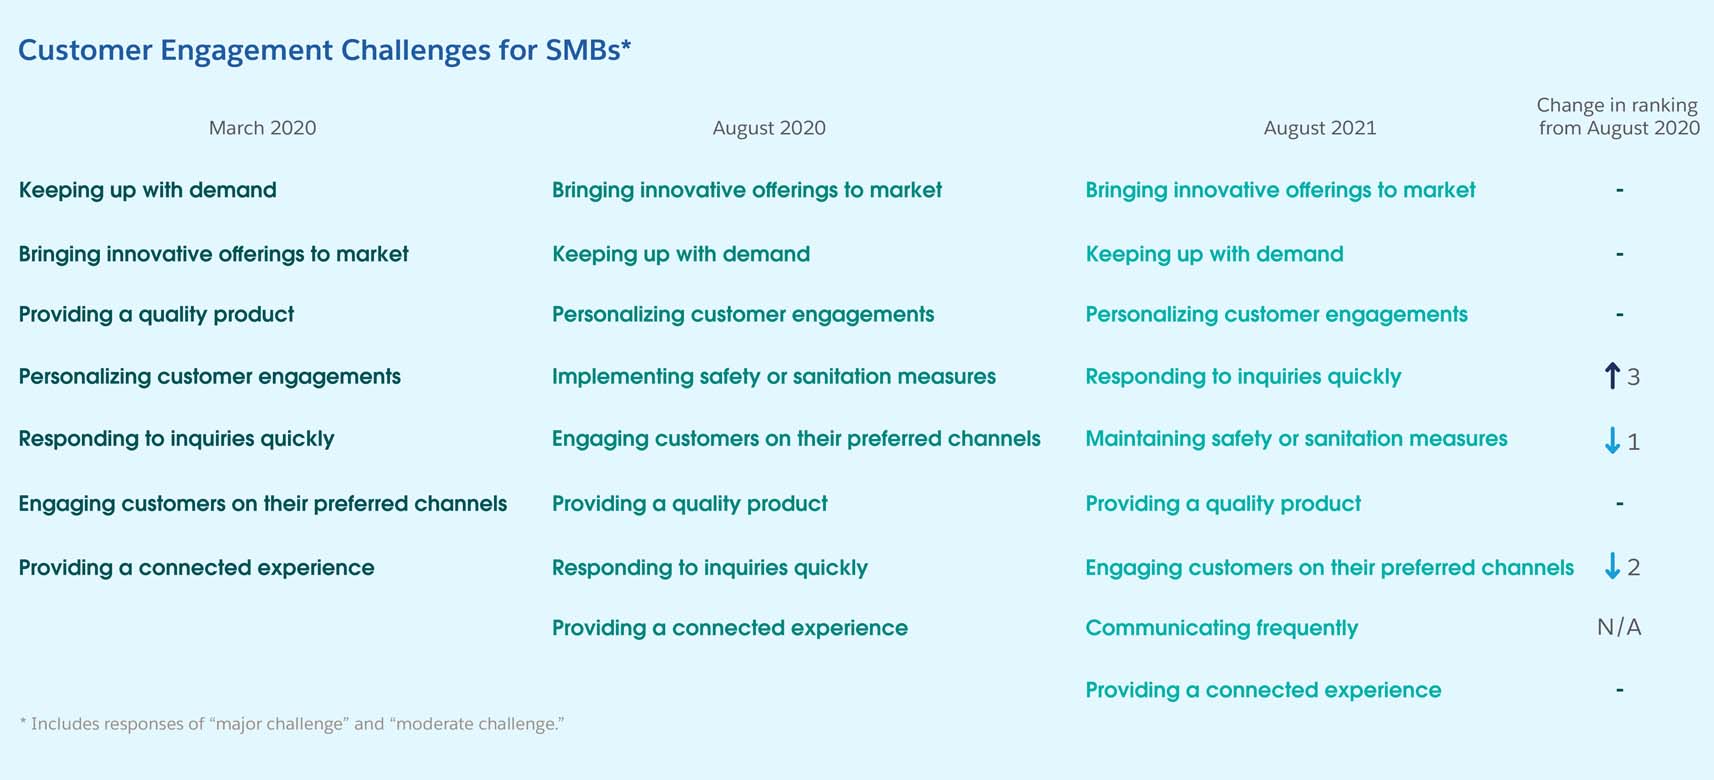 2022 salesforce data table of customer engagement challenges smb